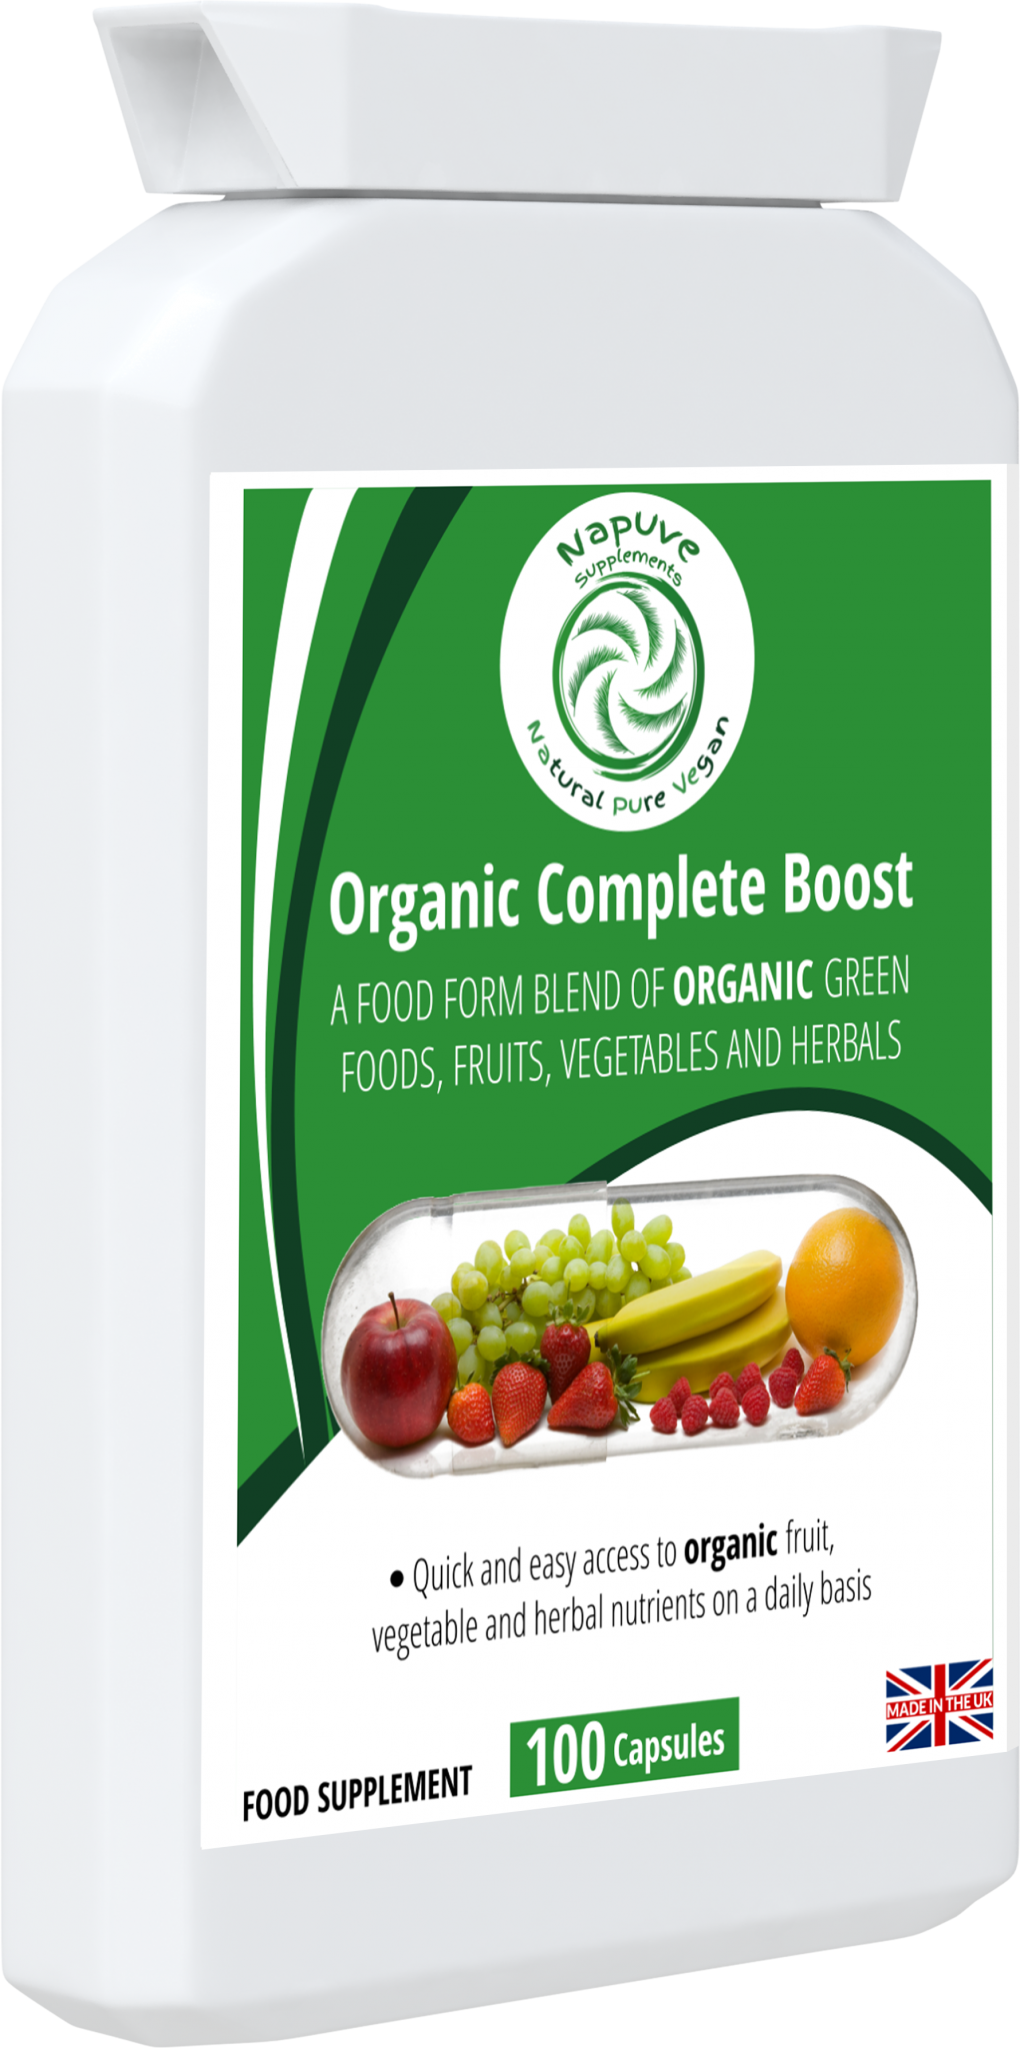 Organic Complete Boost - 100% organic fruit, vegetable and herbal blend in easy-to-take capsules